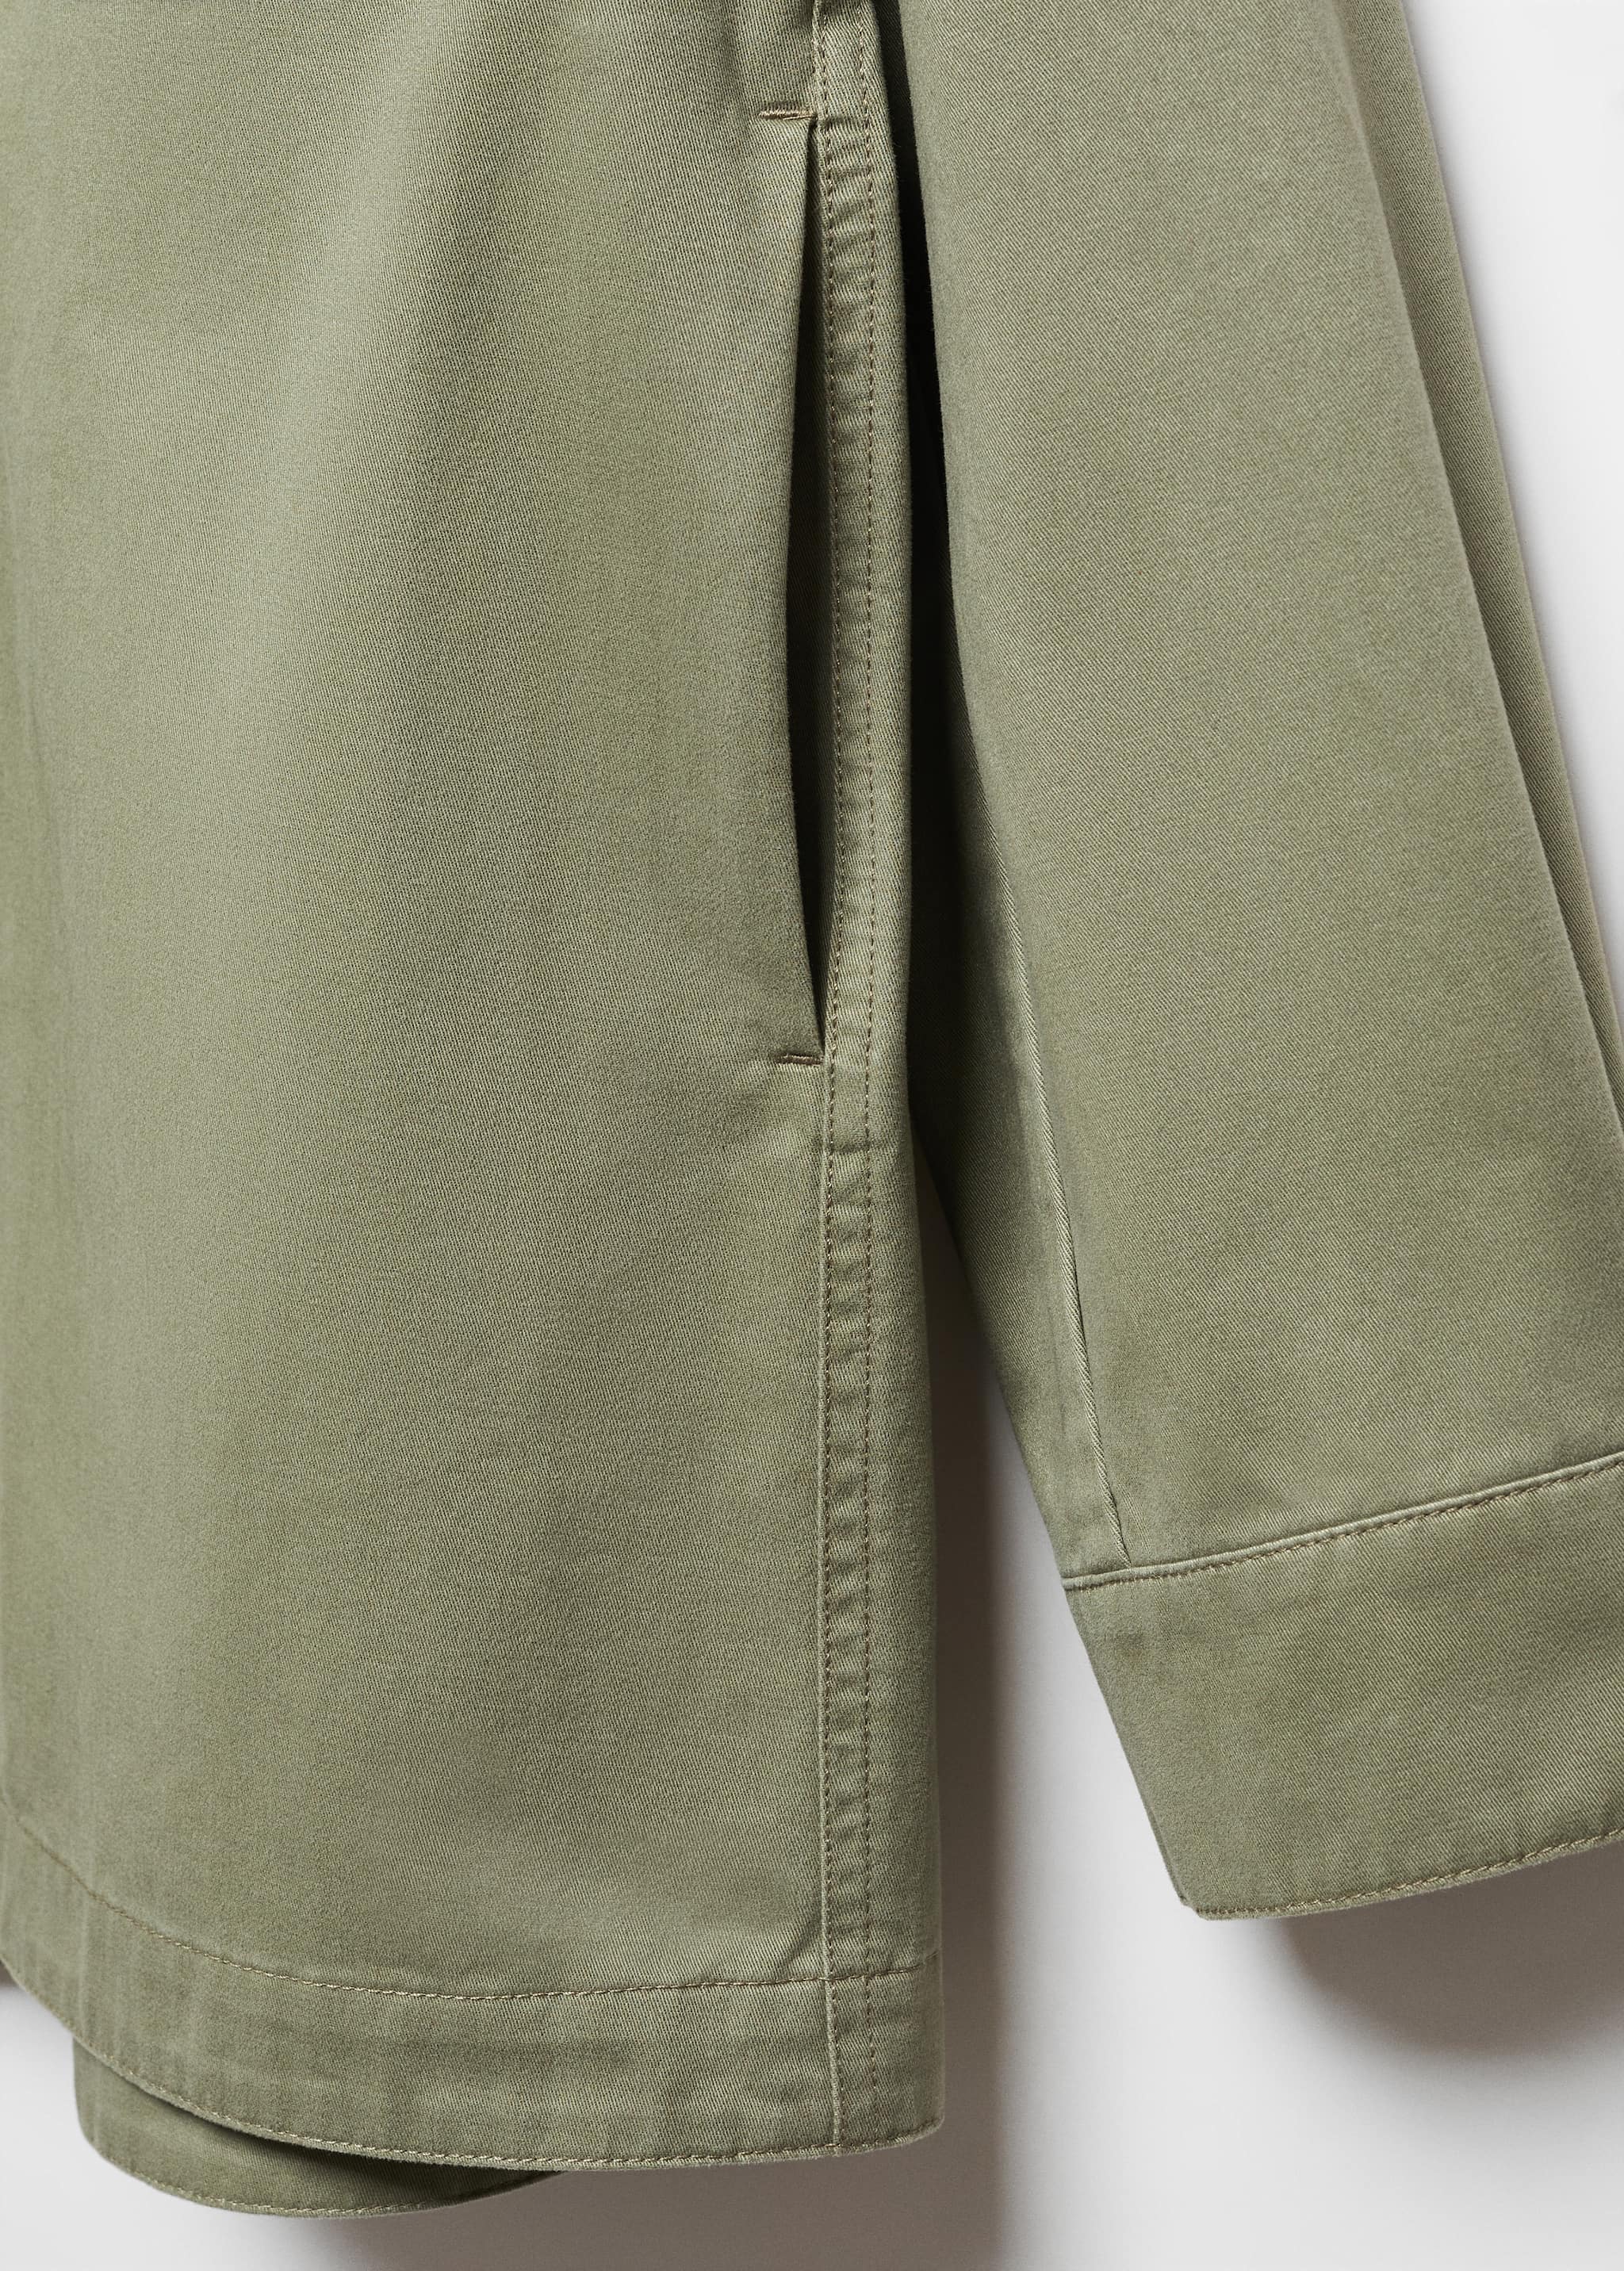 Cotton overshirt with buttons - Details of the article 8